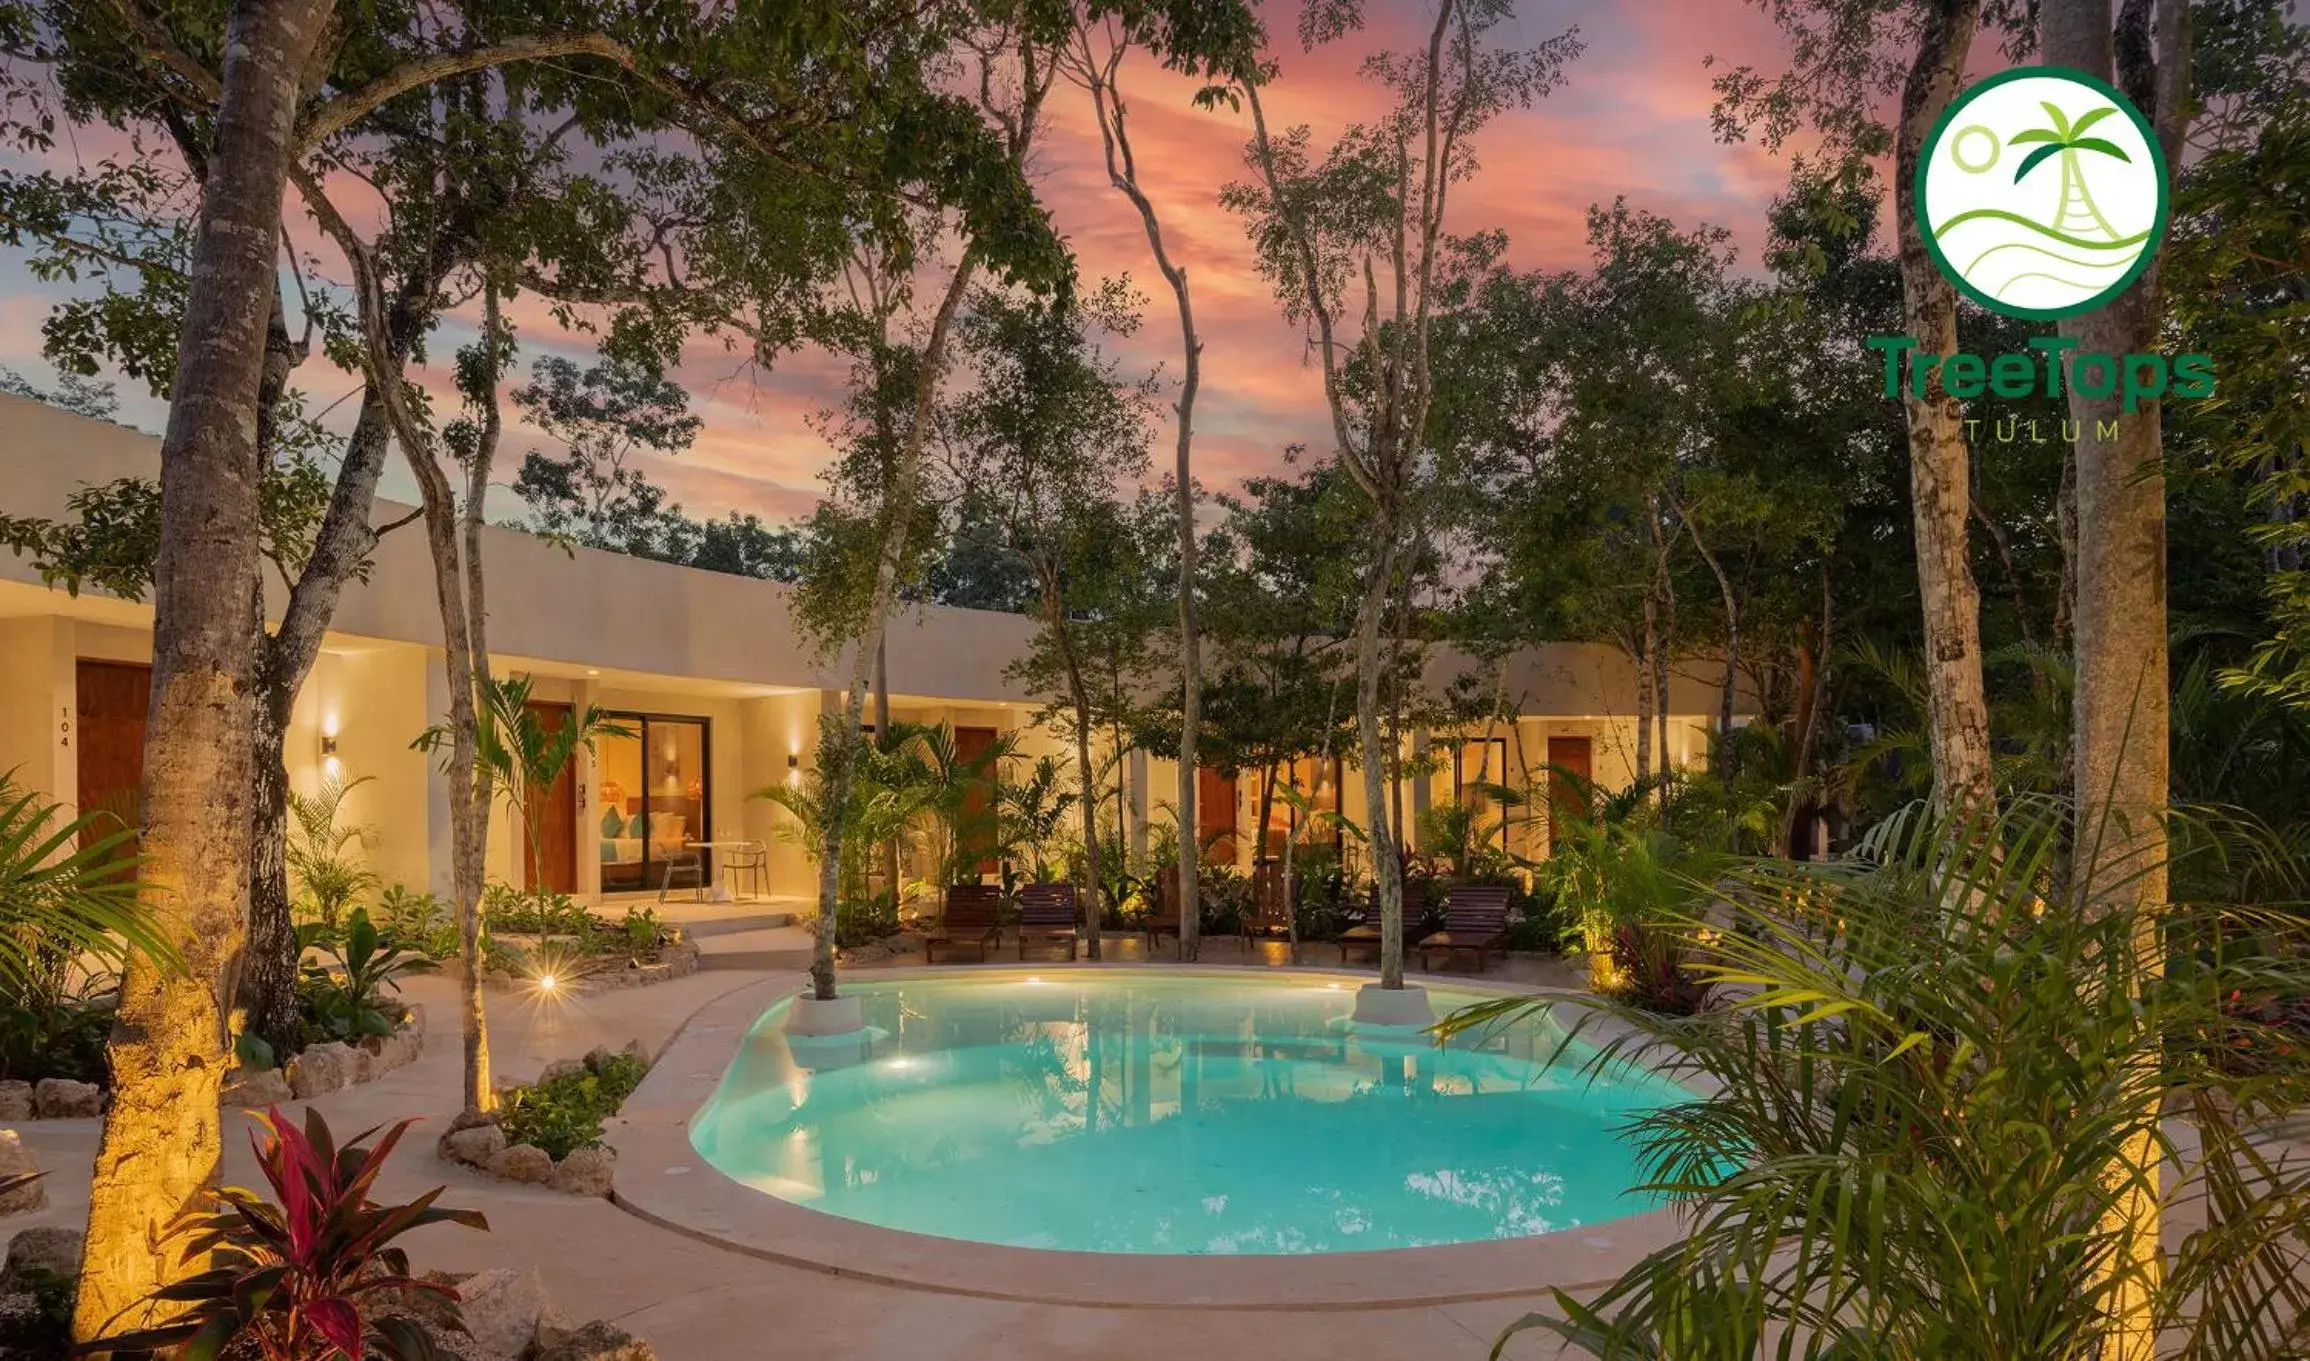 Property building, Swimming Pool in Suites at TreeTops Tulum